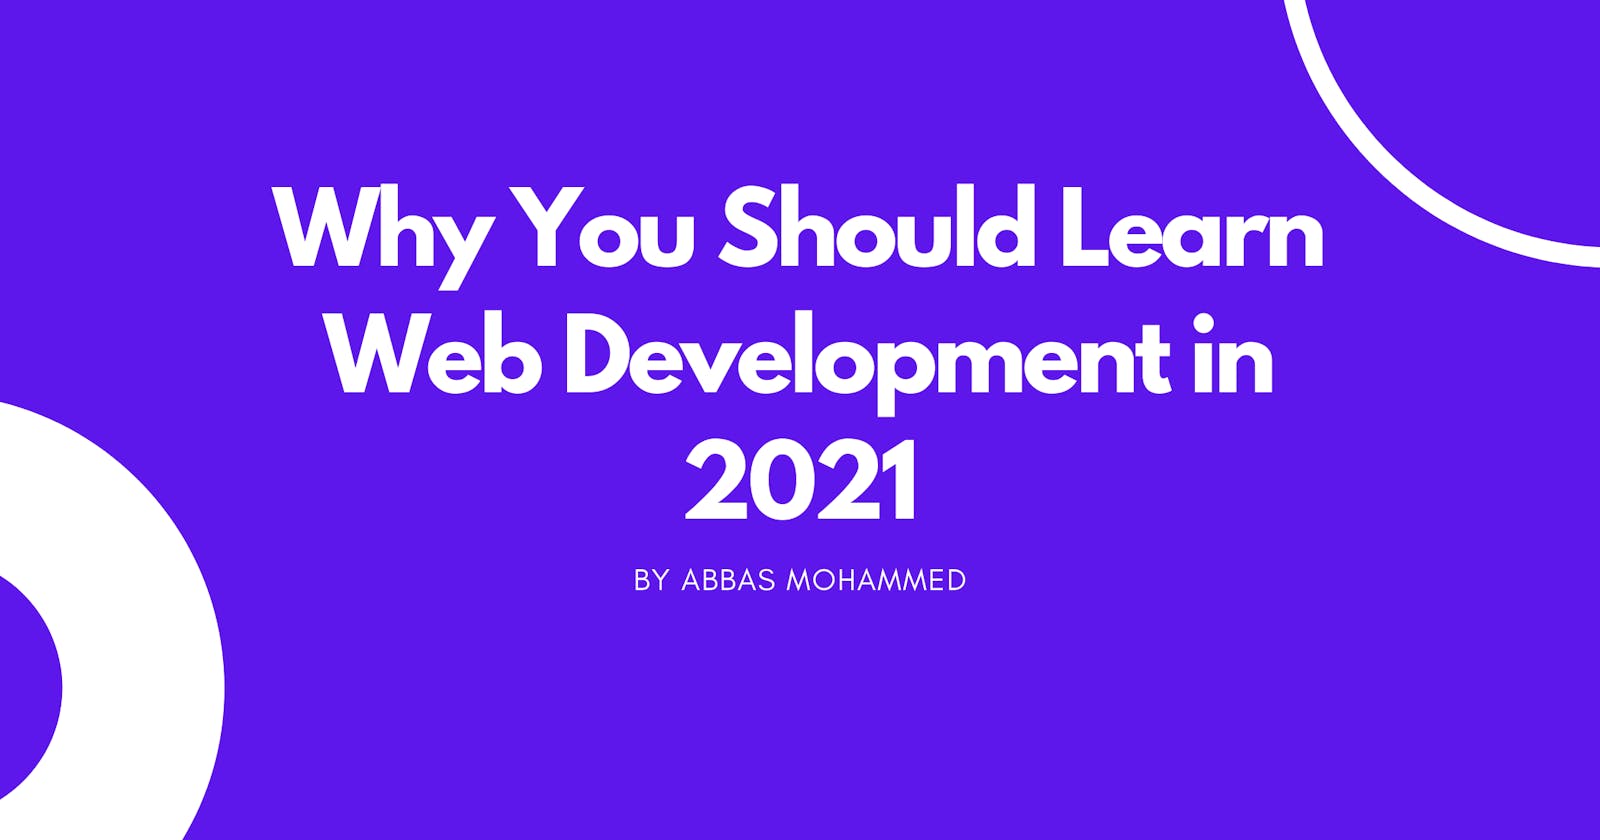 Why You Should Learn Web Development in 2021